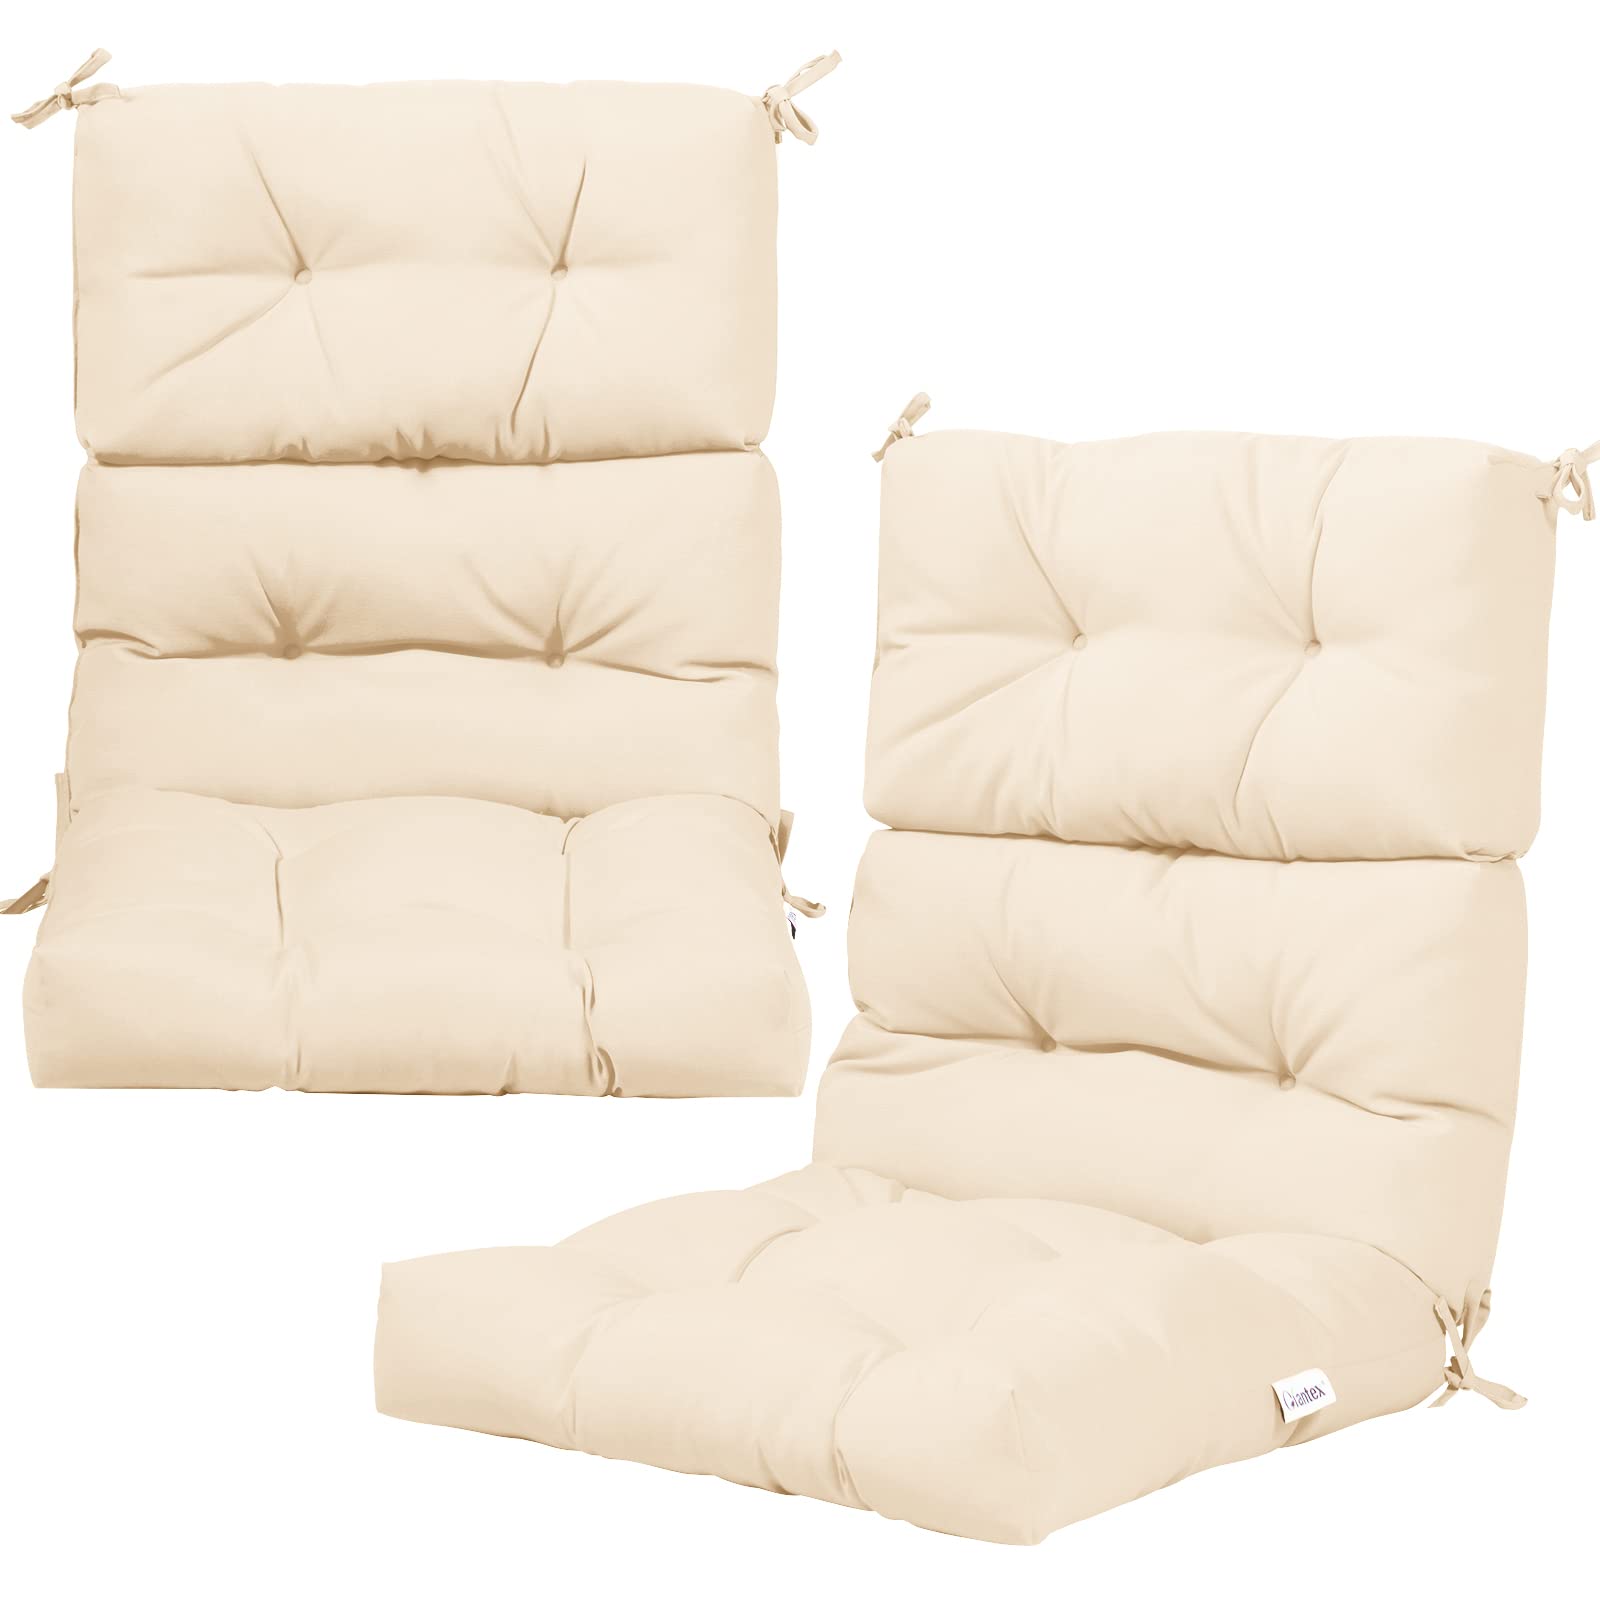 4.5 Inch Thick Outdoor High Back Chair Pads | Tufted Patio Cushion